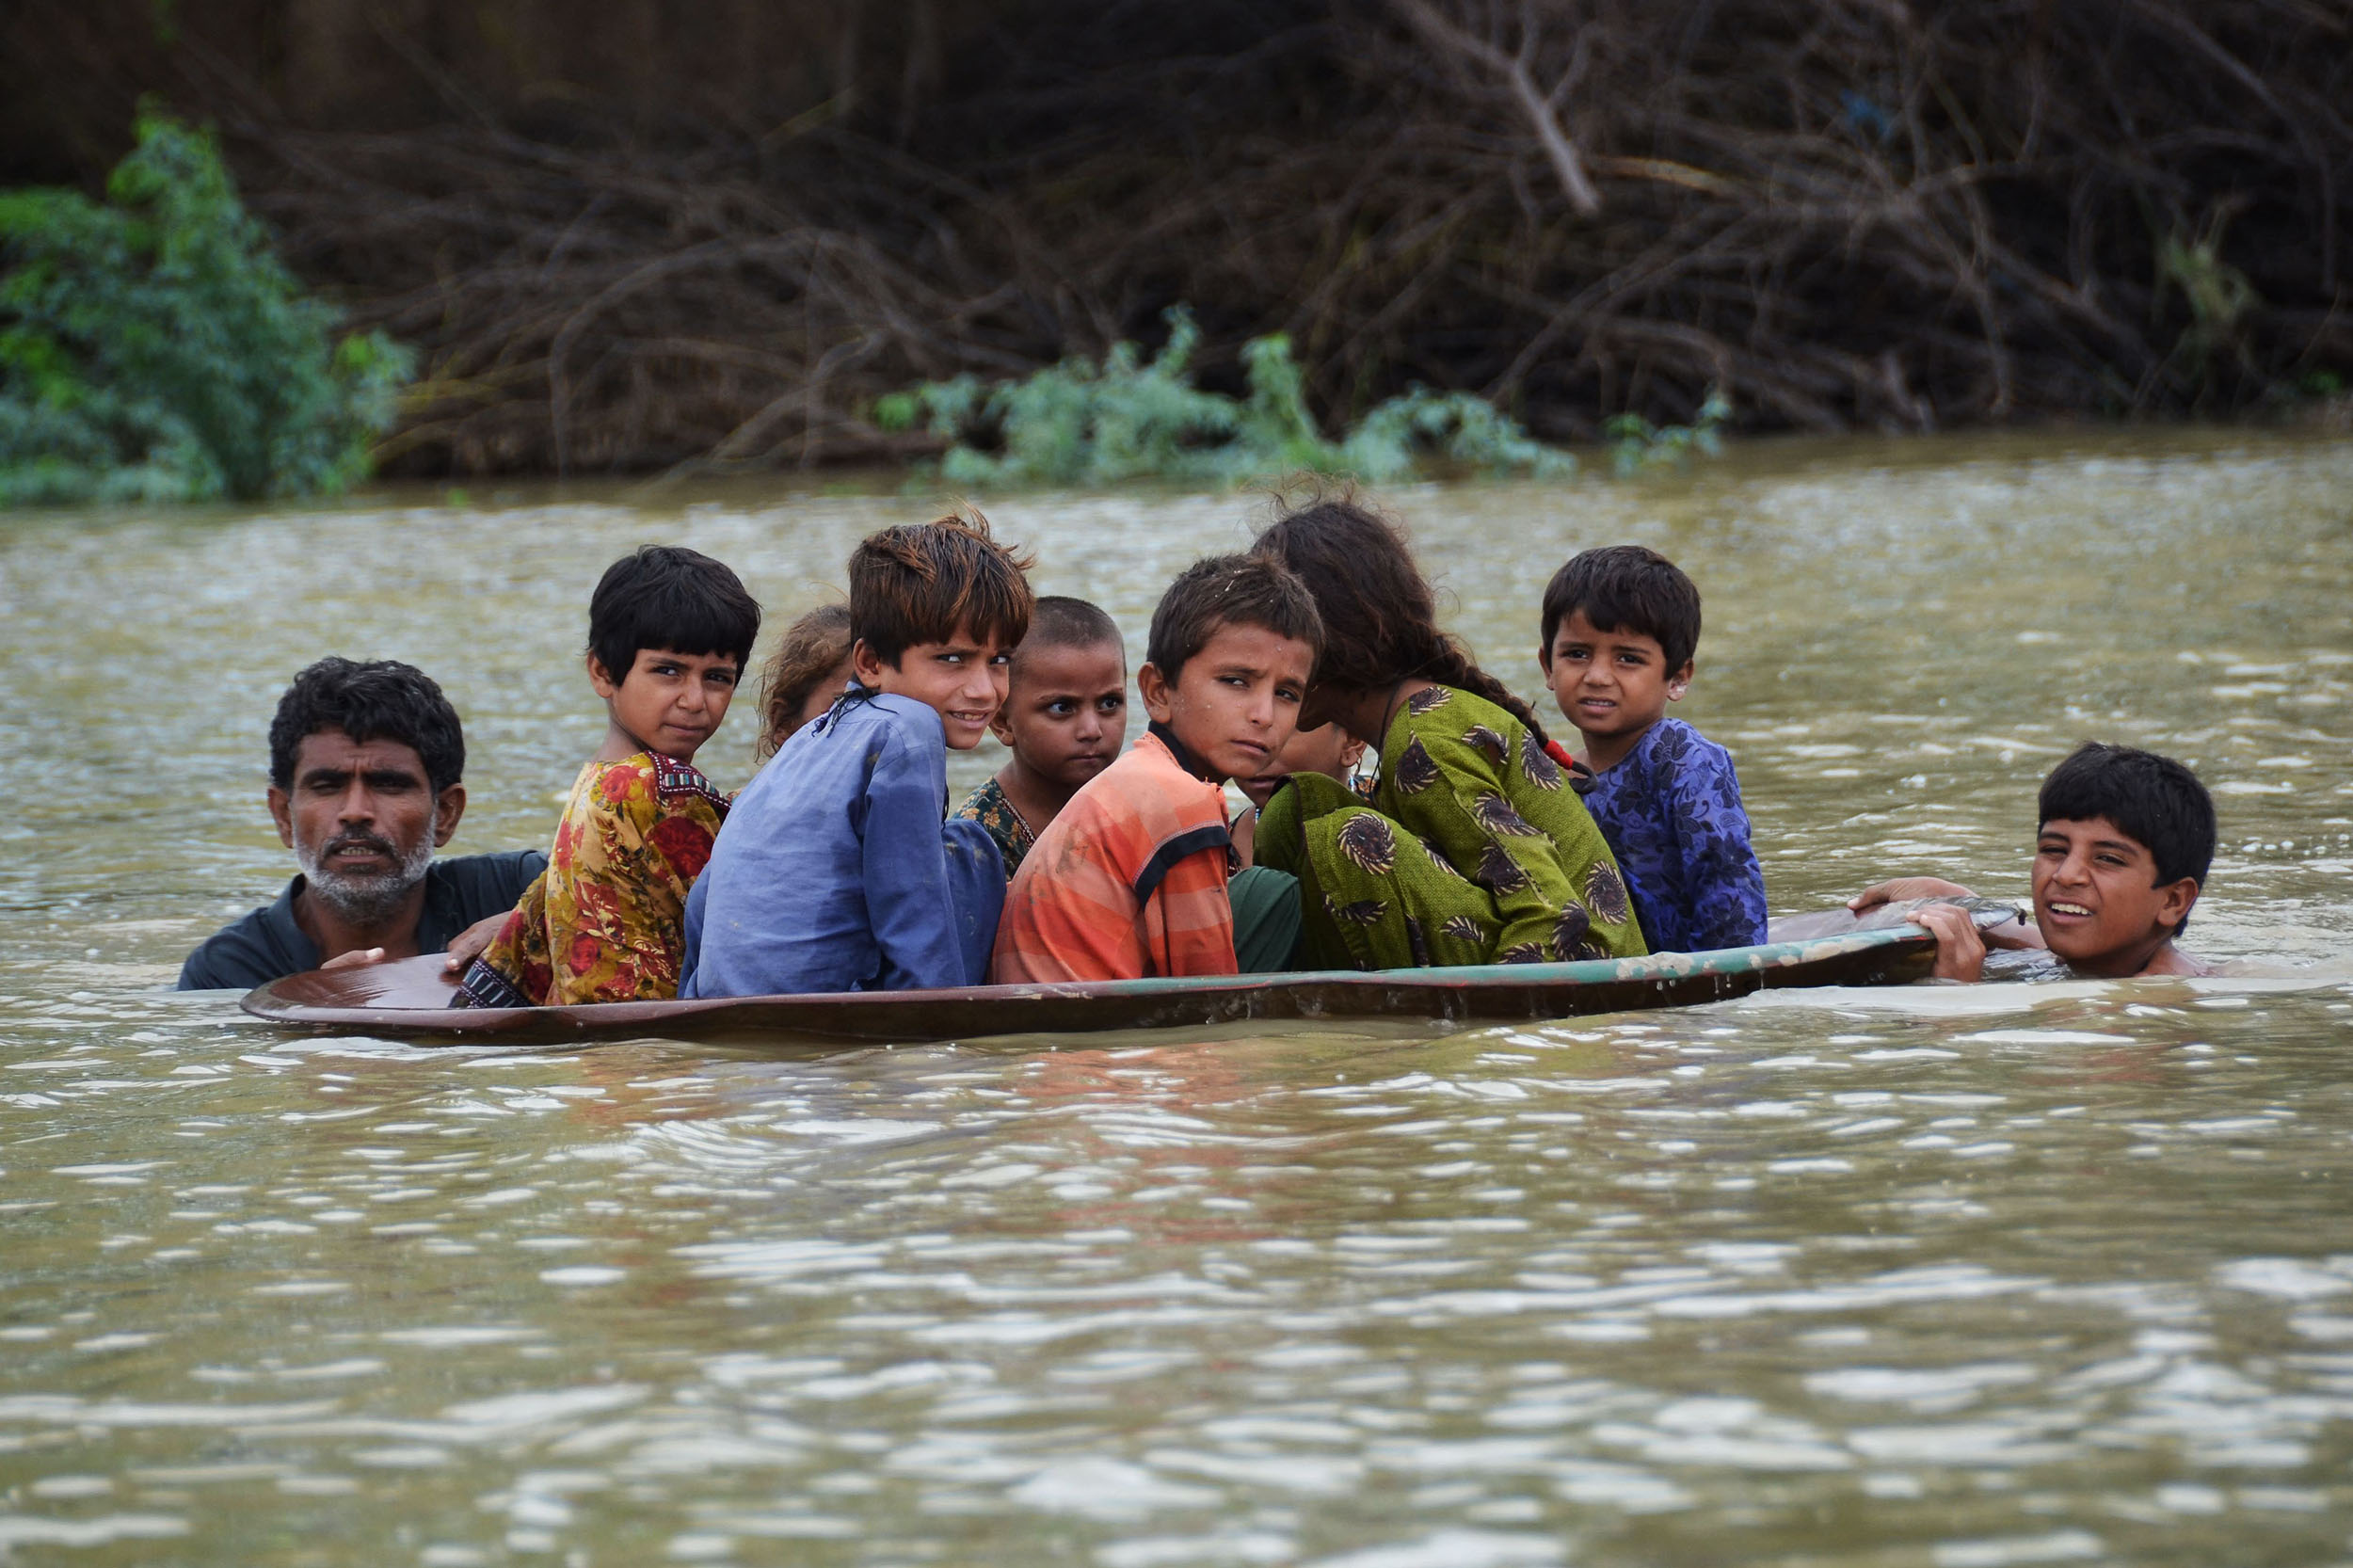 Children get pushed along water in a makeshift boat